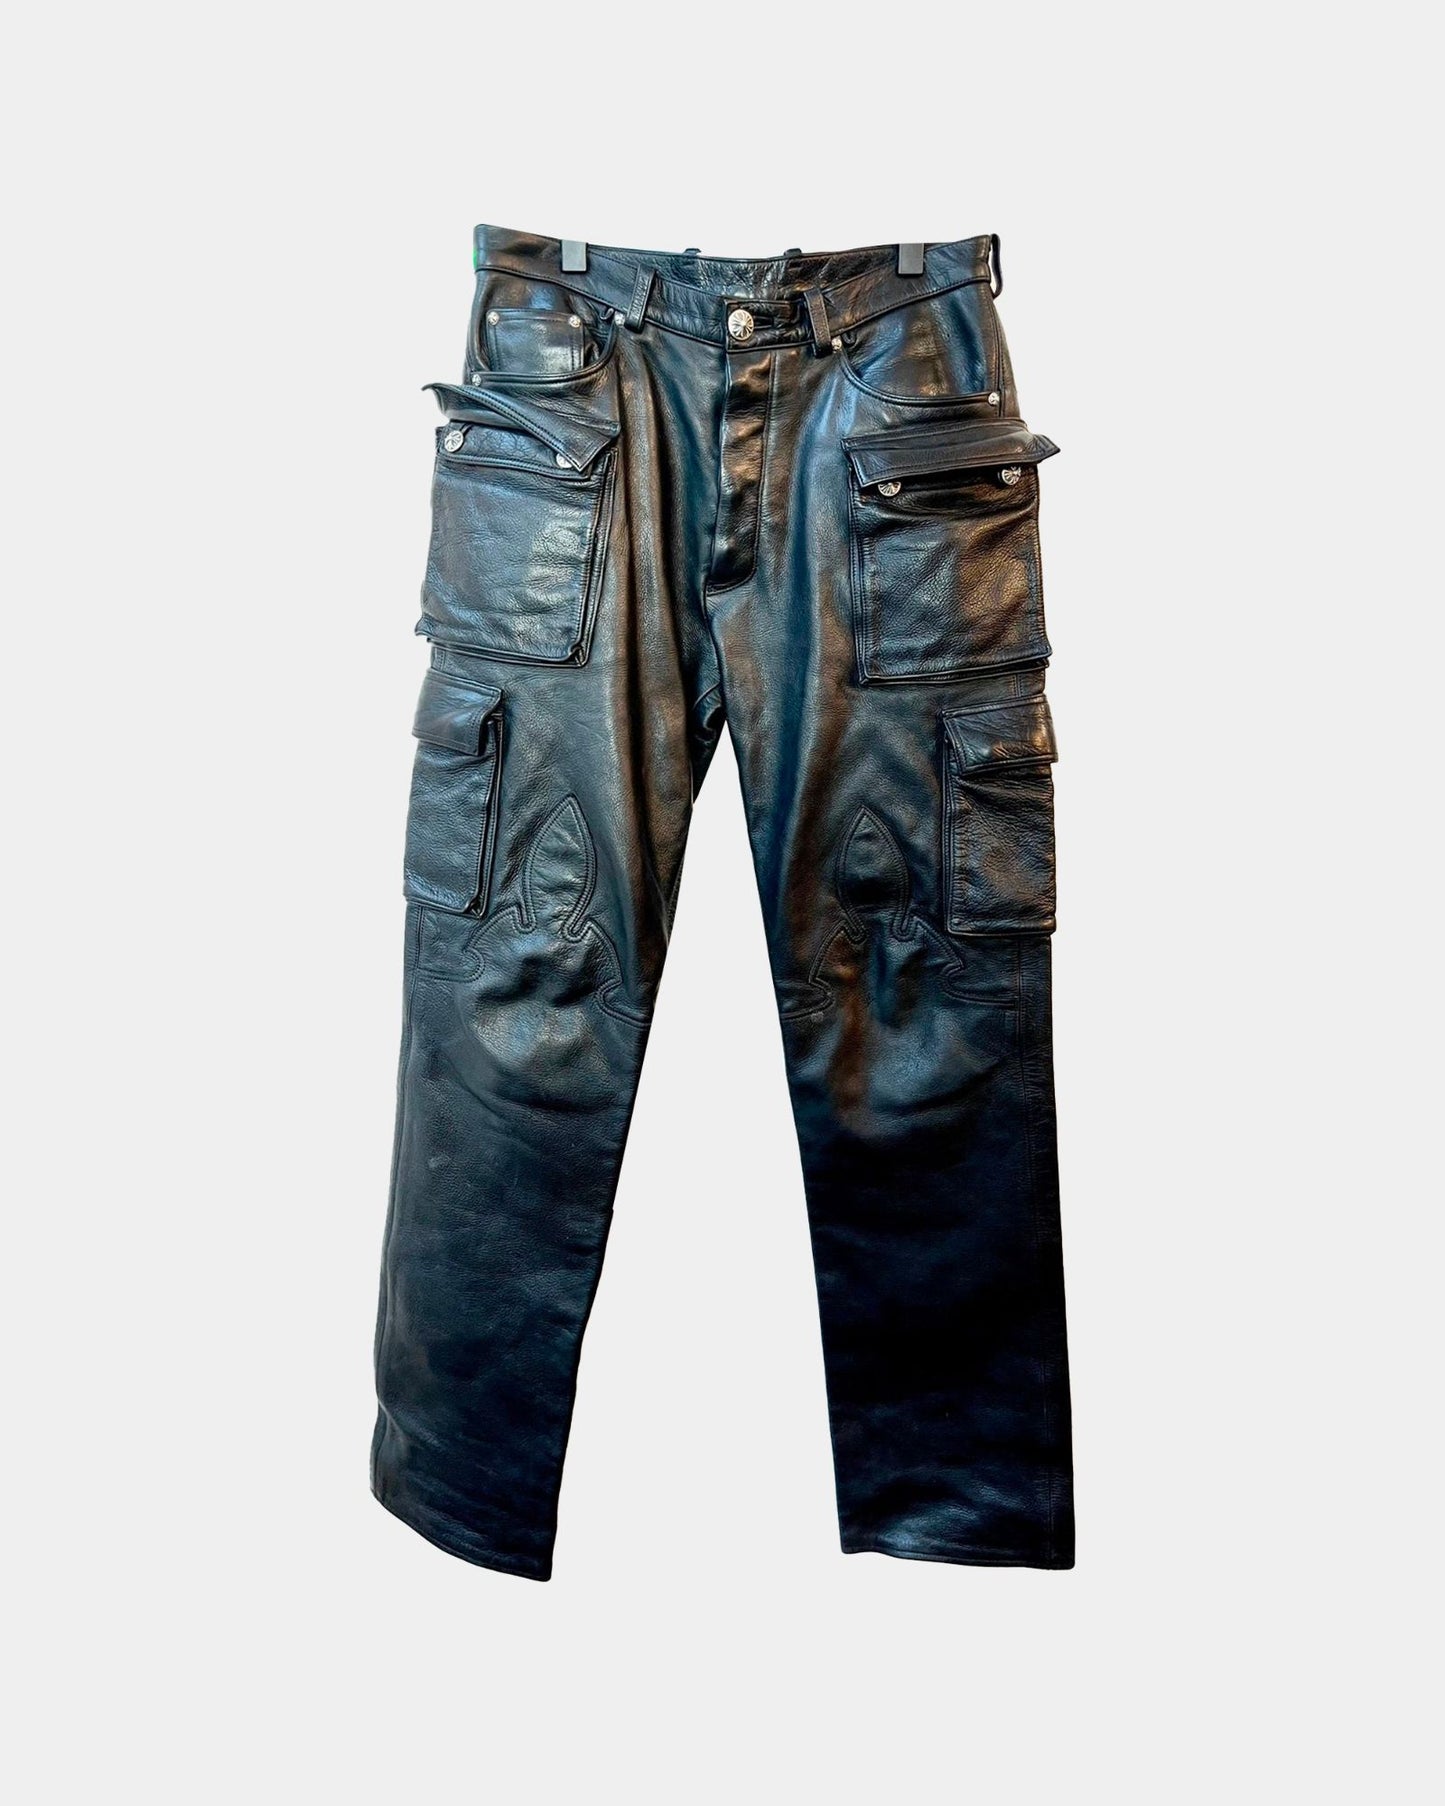 Chrome Hearts FULL LEATHER 9PKT Fatigue Cargo Pants Jeans